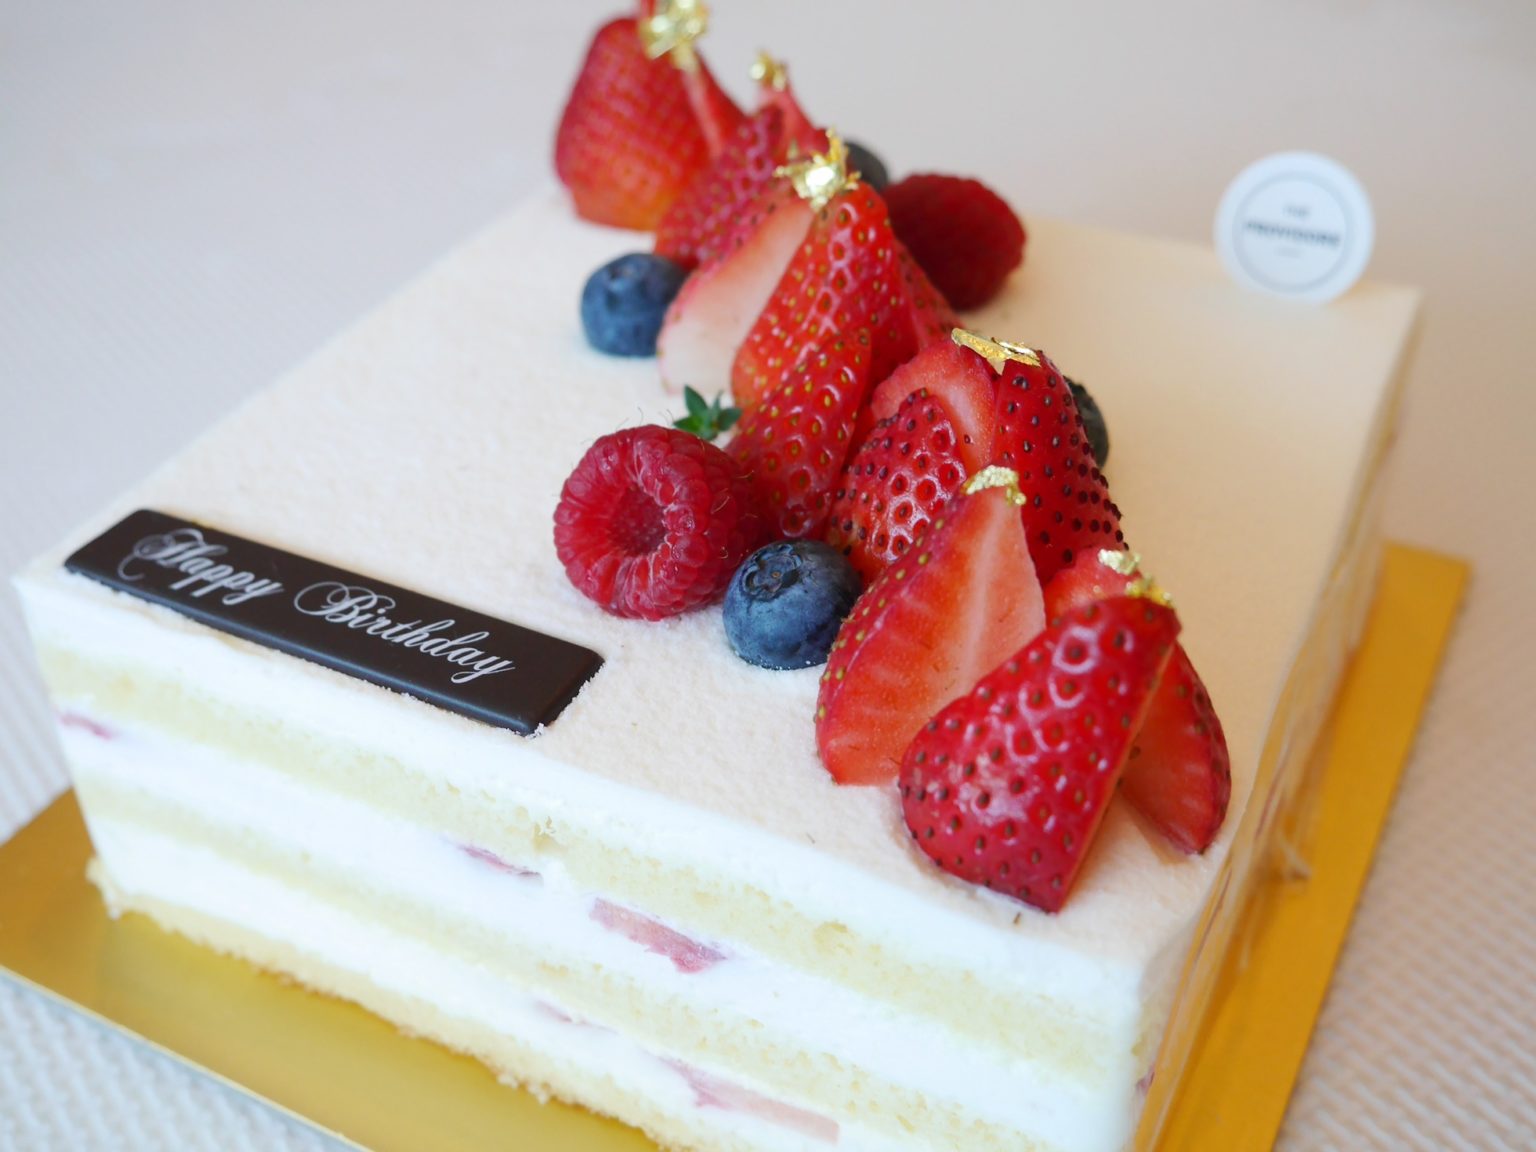 Providore-DOWNTOWN-GALLERYのホールの誕生日ショートケーキ